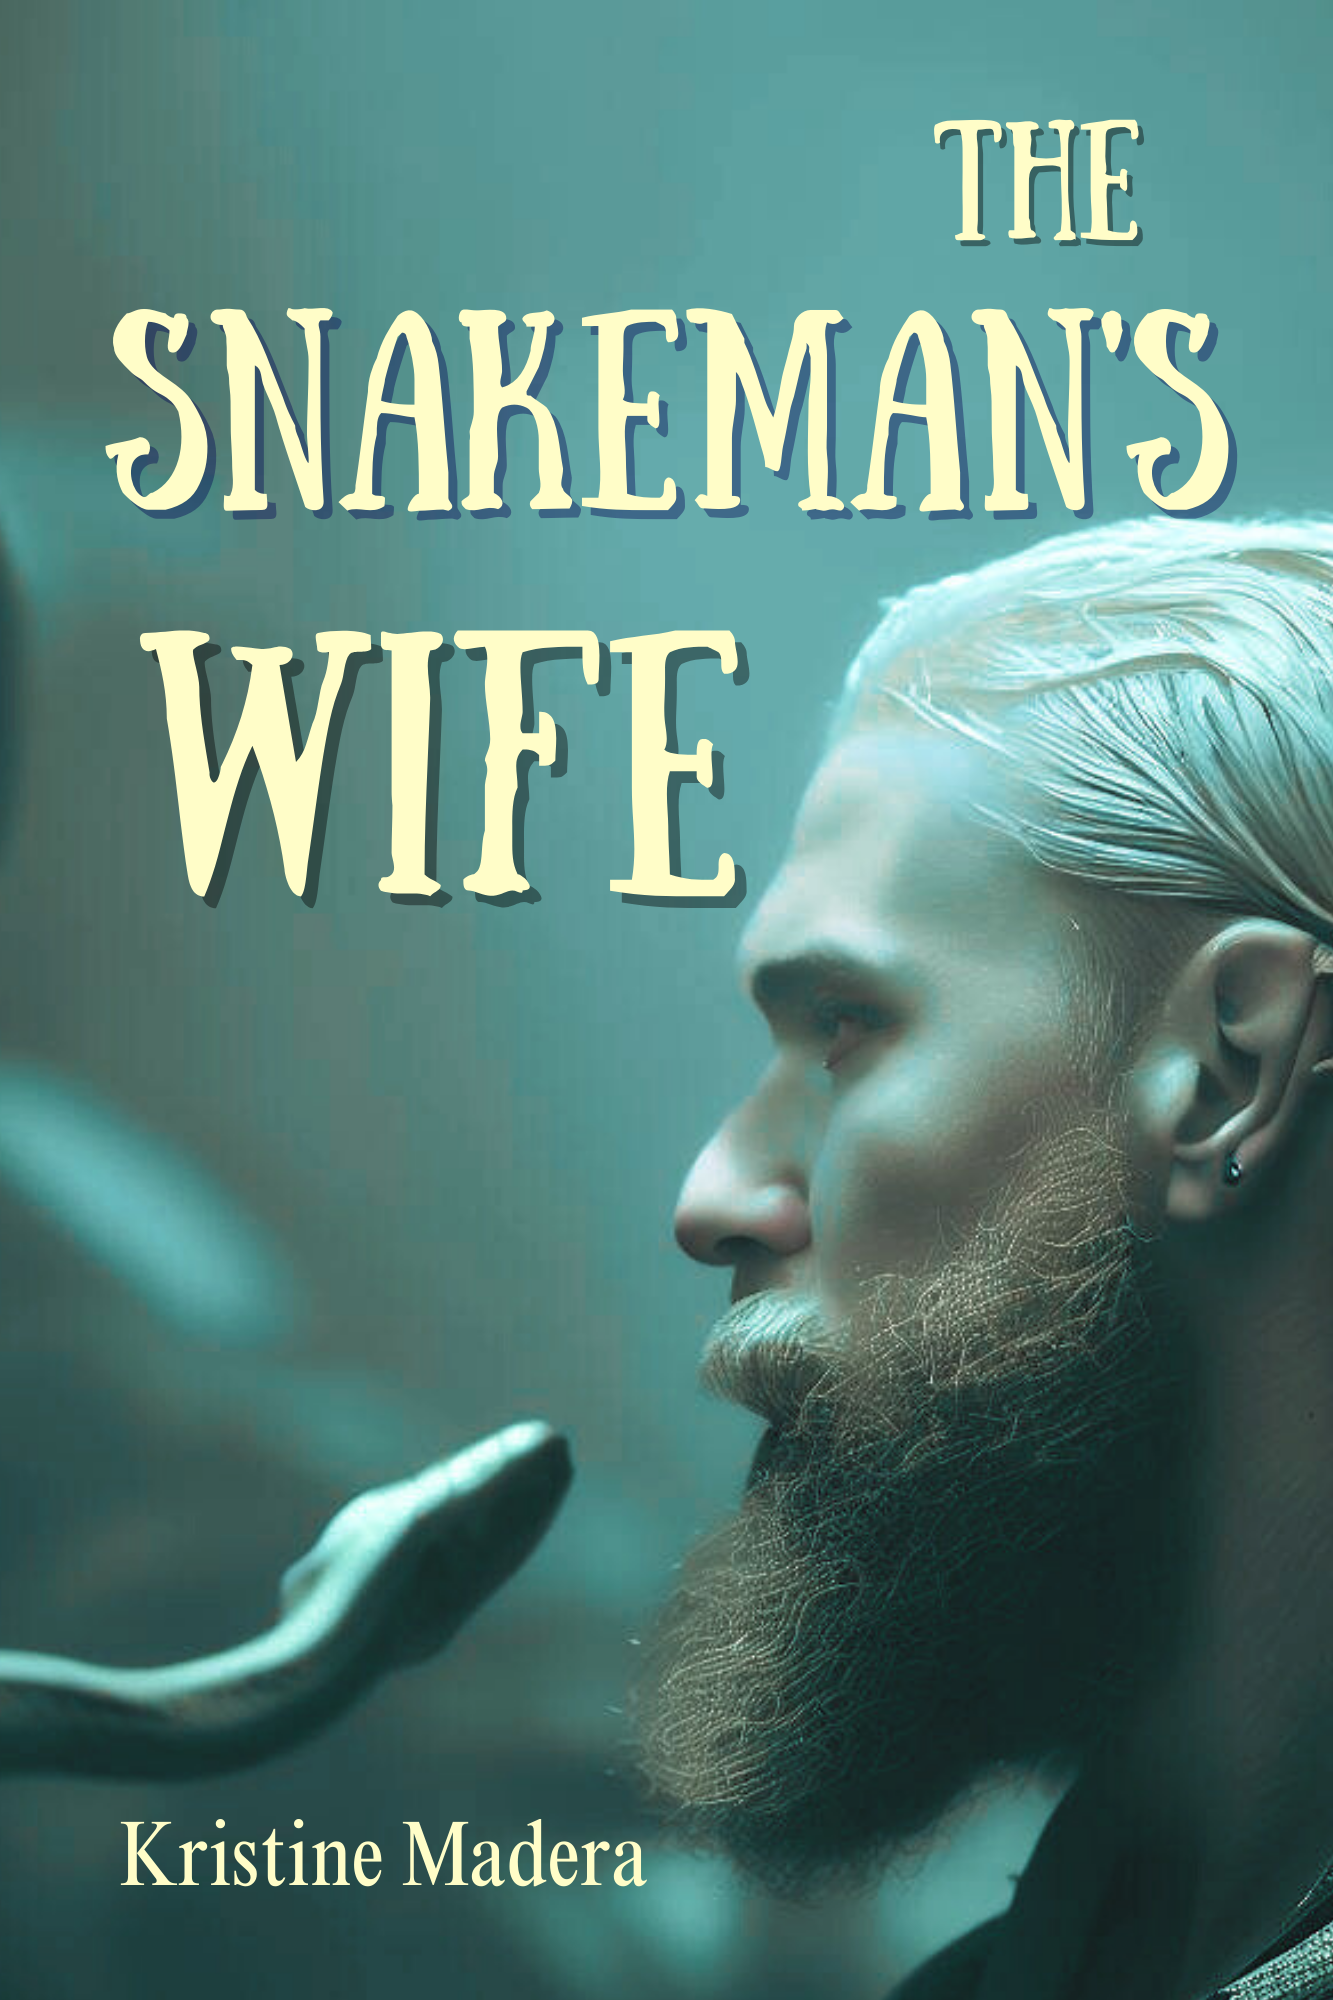 The Snakeman's Wife by Kristine Madera